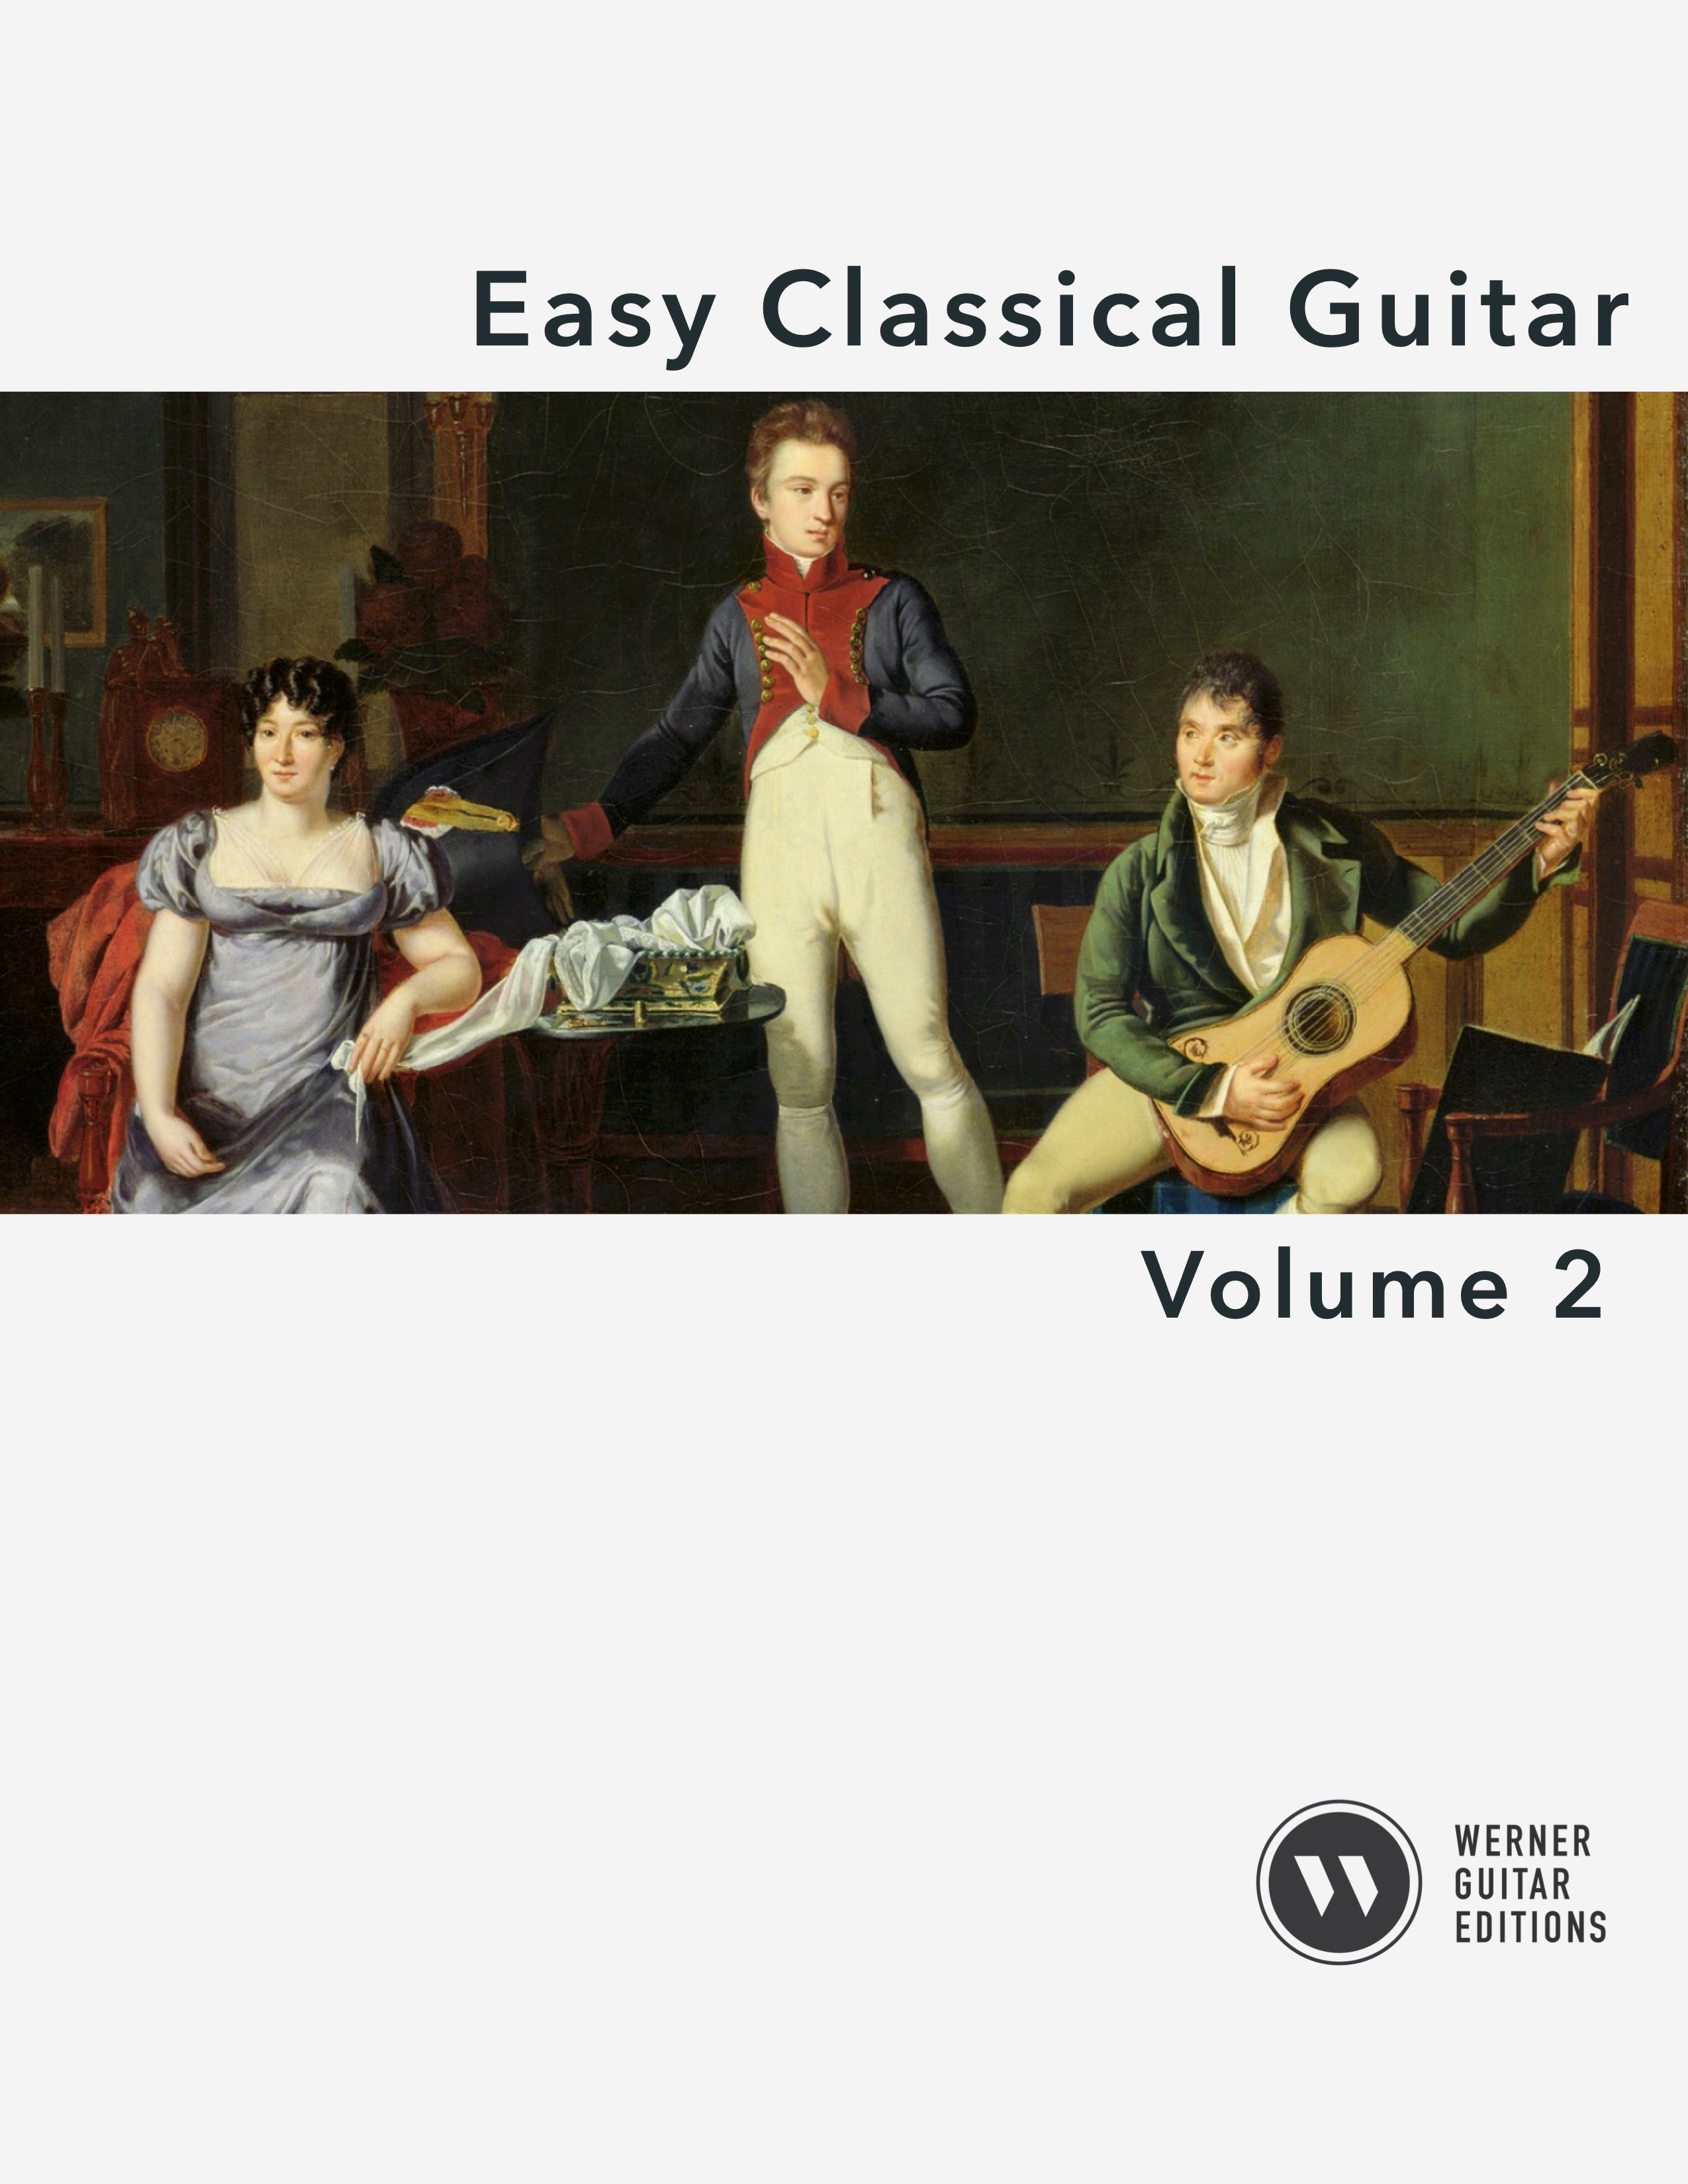 Easy Classical Guitar Volume 2 (PDF) – Werner Guitar Editions